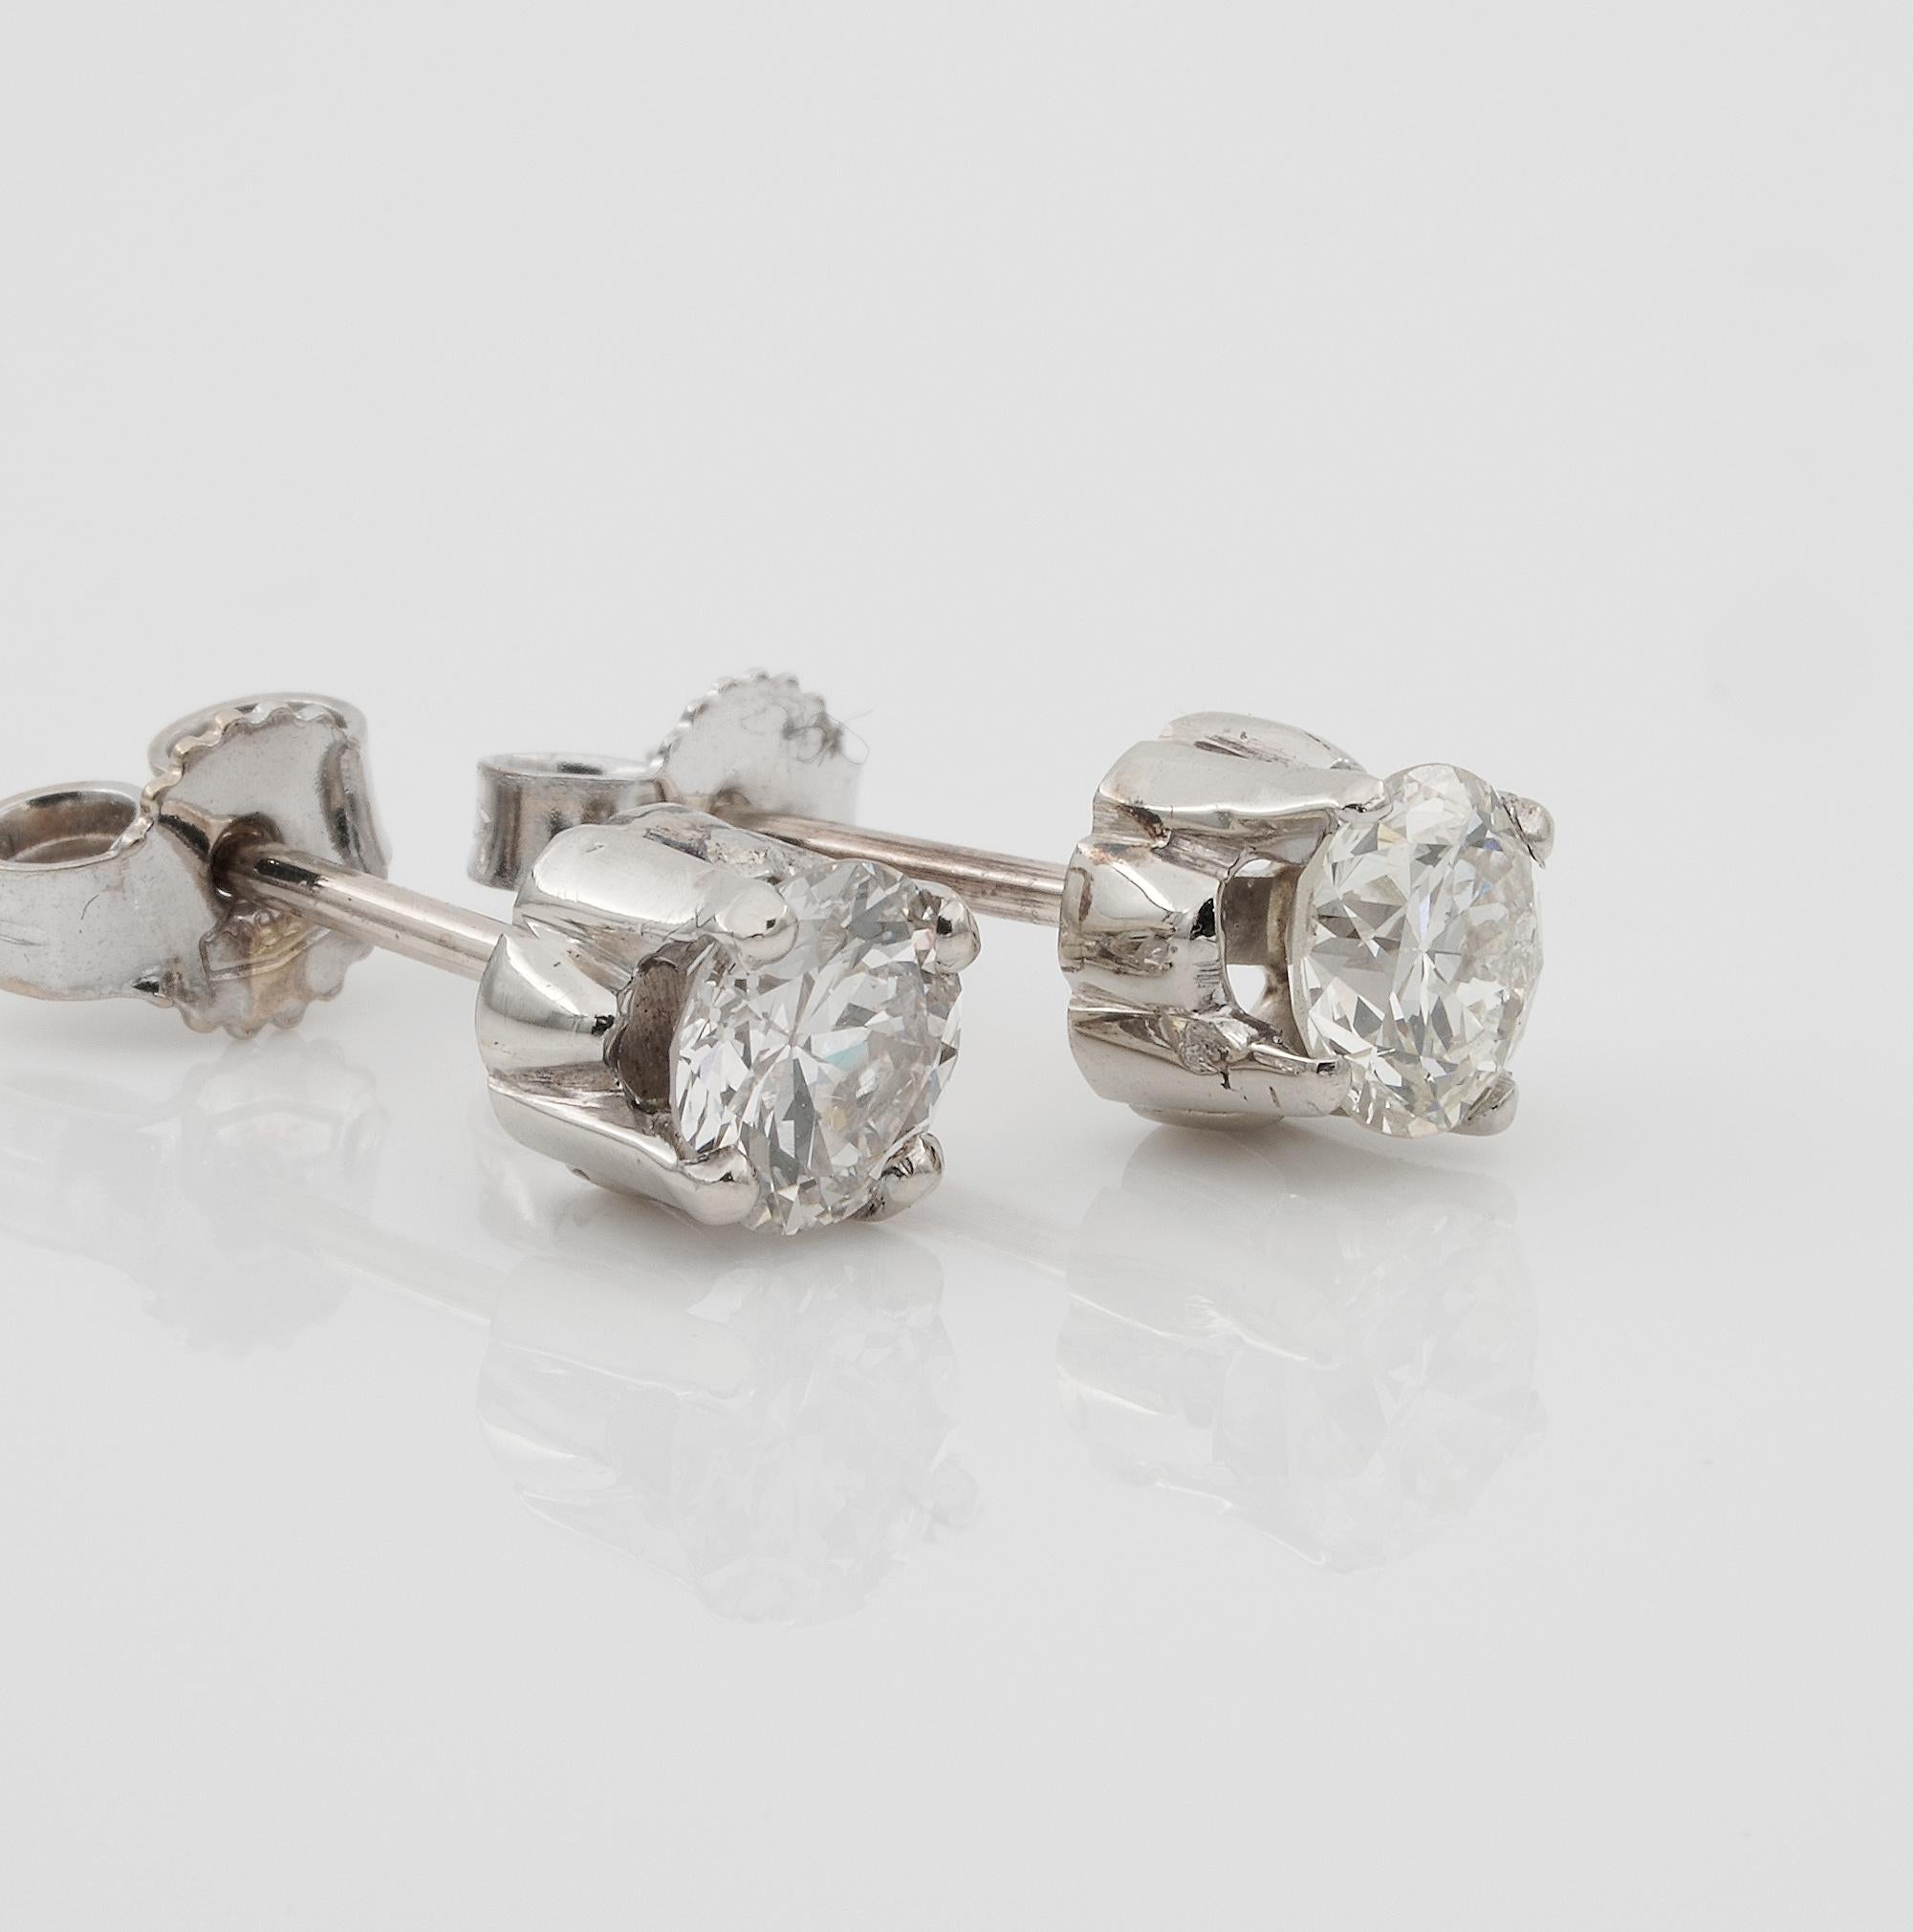 These lovely pair of late Art Deco Diamond studs are 1935 ca
They have four prongs hand crafted 18 KT mount
Diamonds are old European cut 1.18 Ct TCW – rated as H/I VS/SI – average 5.2 mm. – they have wonderful glowing sparkle and good average